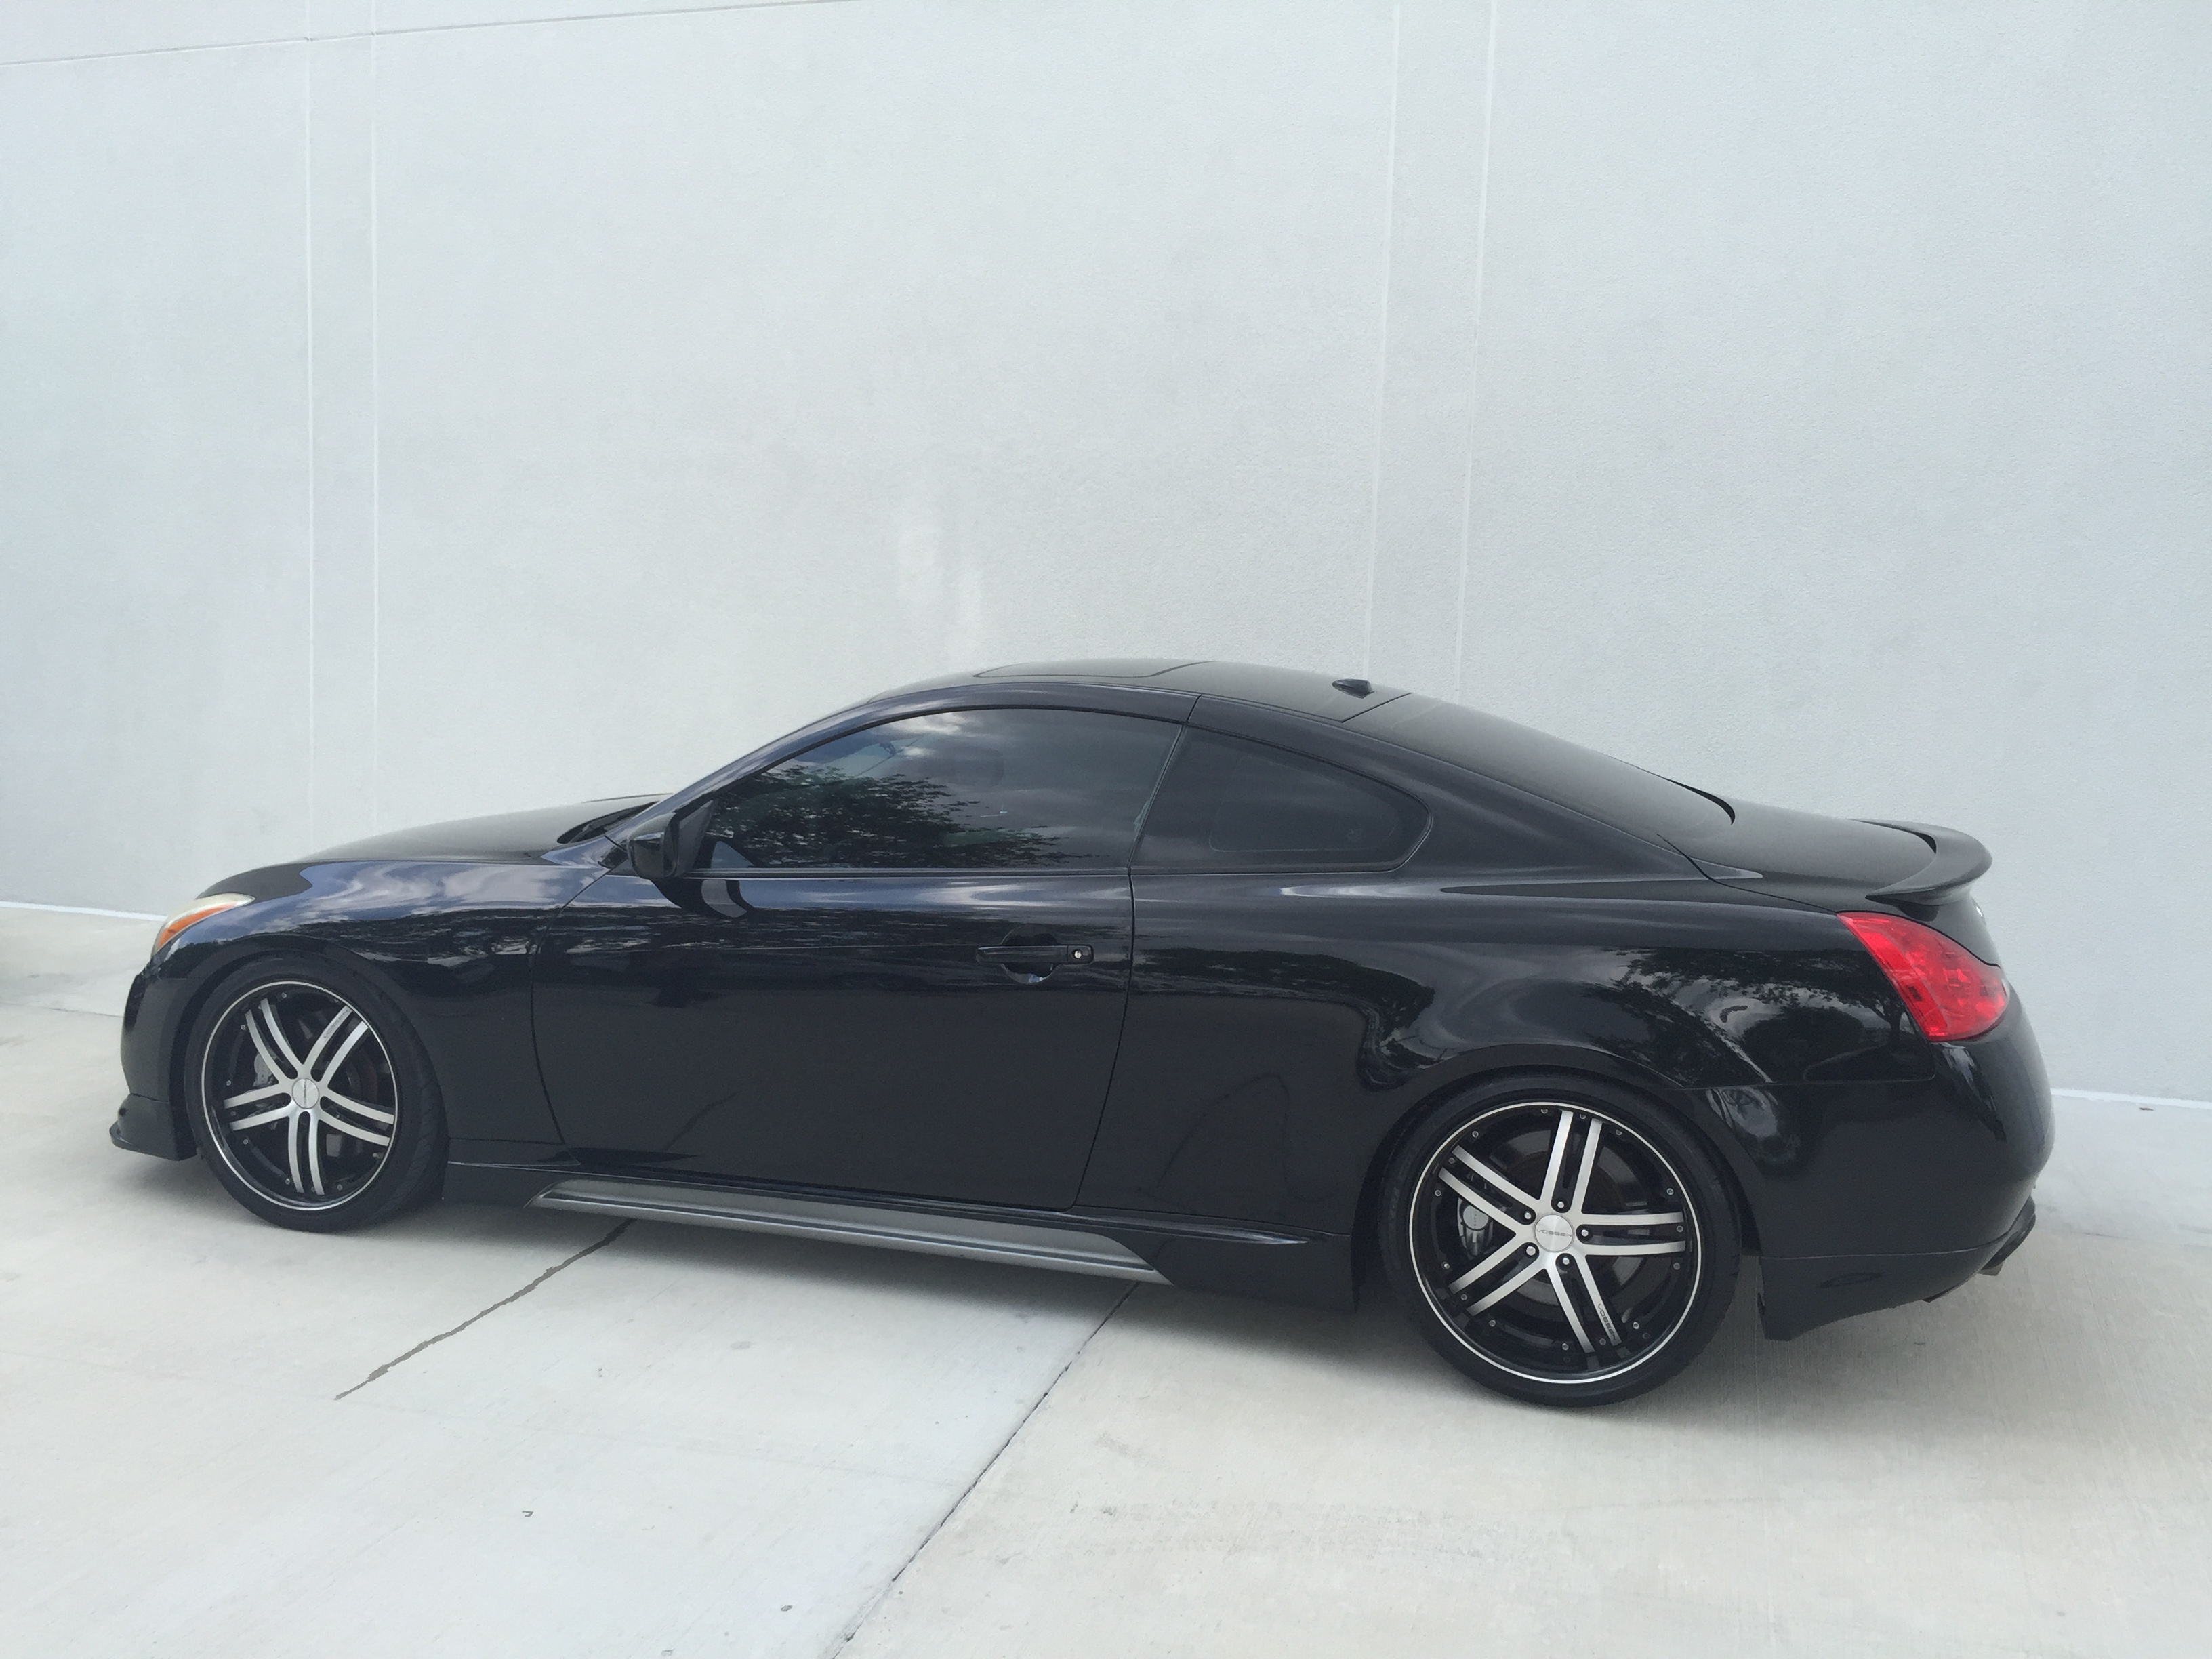 33 Best Images Infiniti G37 Sport Coupe 2008 - Sell used 2008 Infiniti G37 Journey Coupe 2-Door 3.7L G37S ...